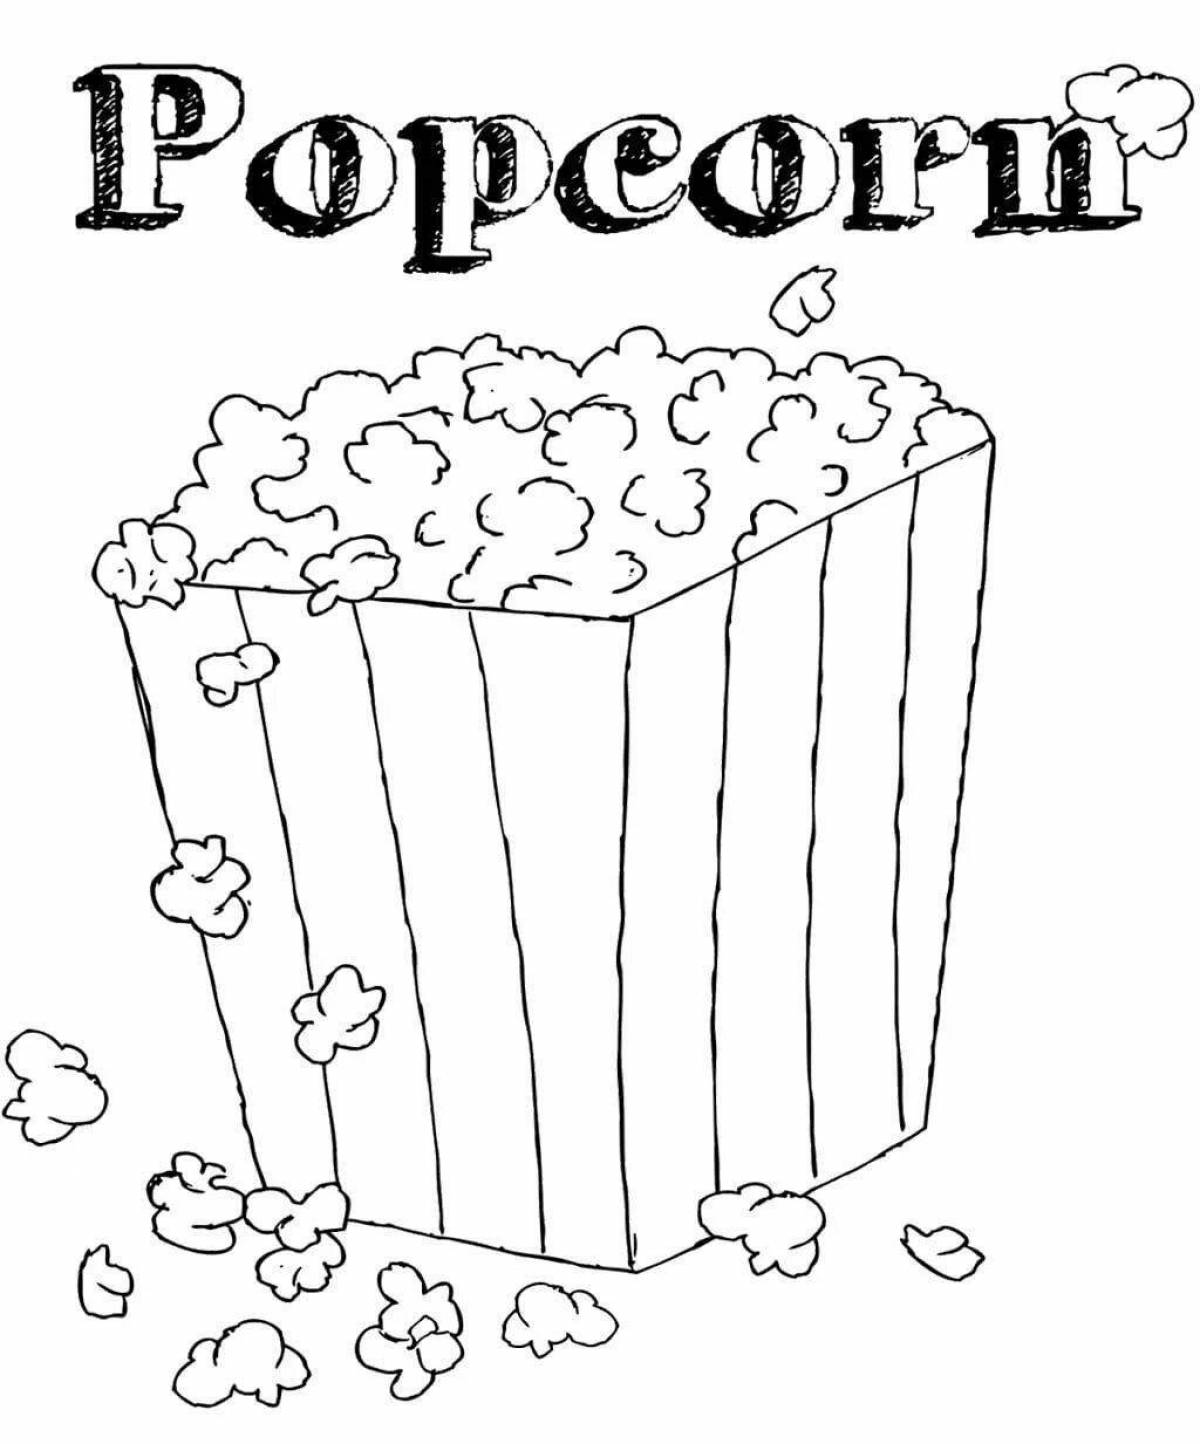 Bold popcorn coloring page for kids